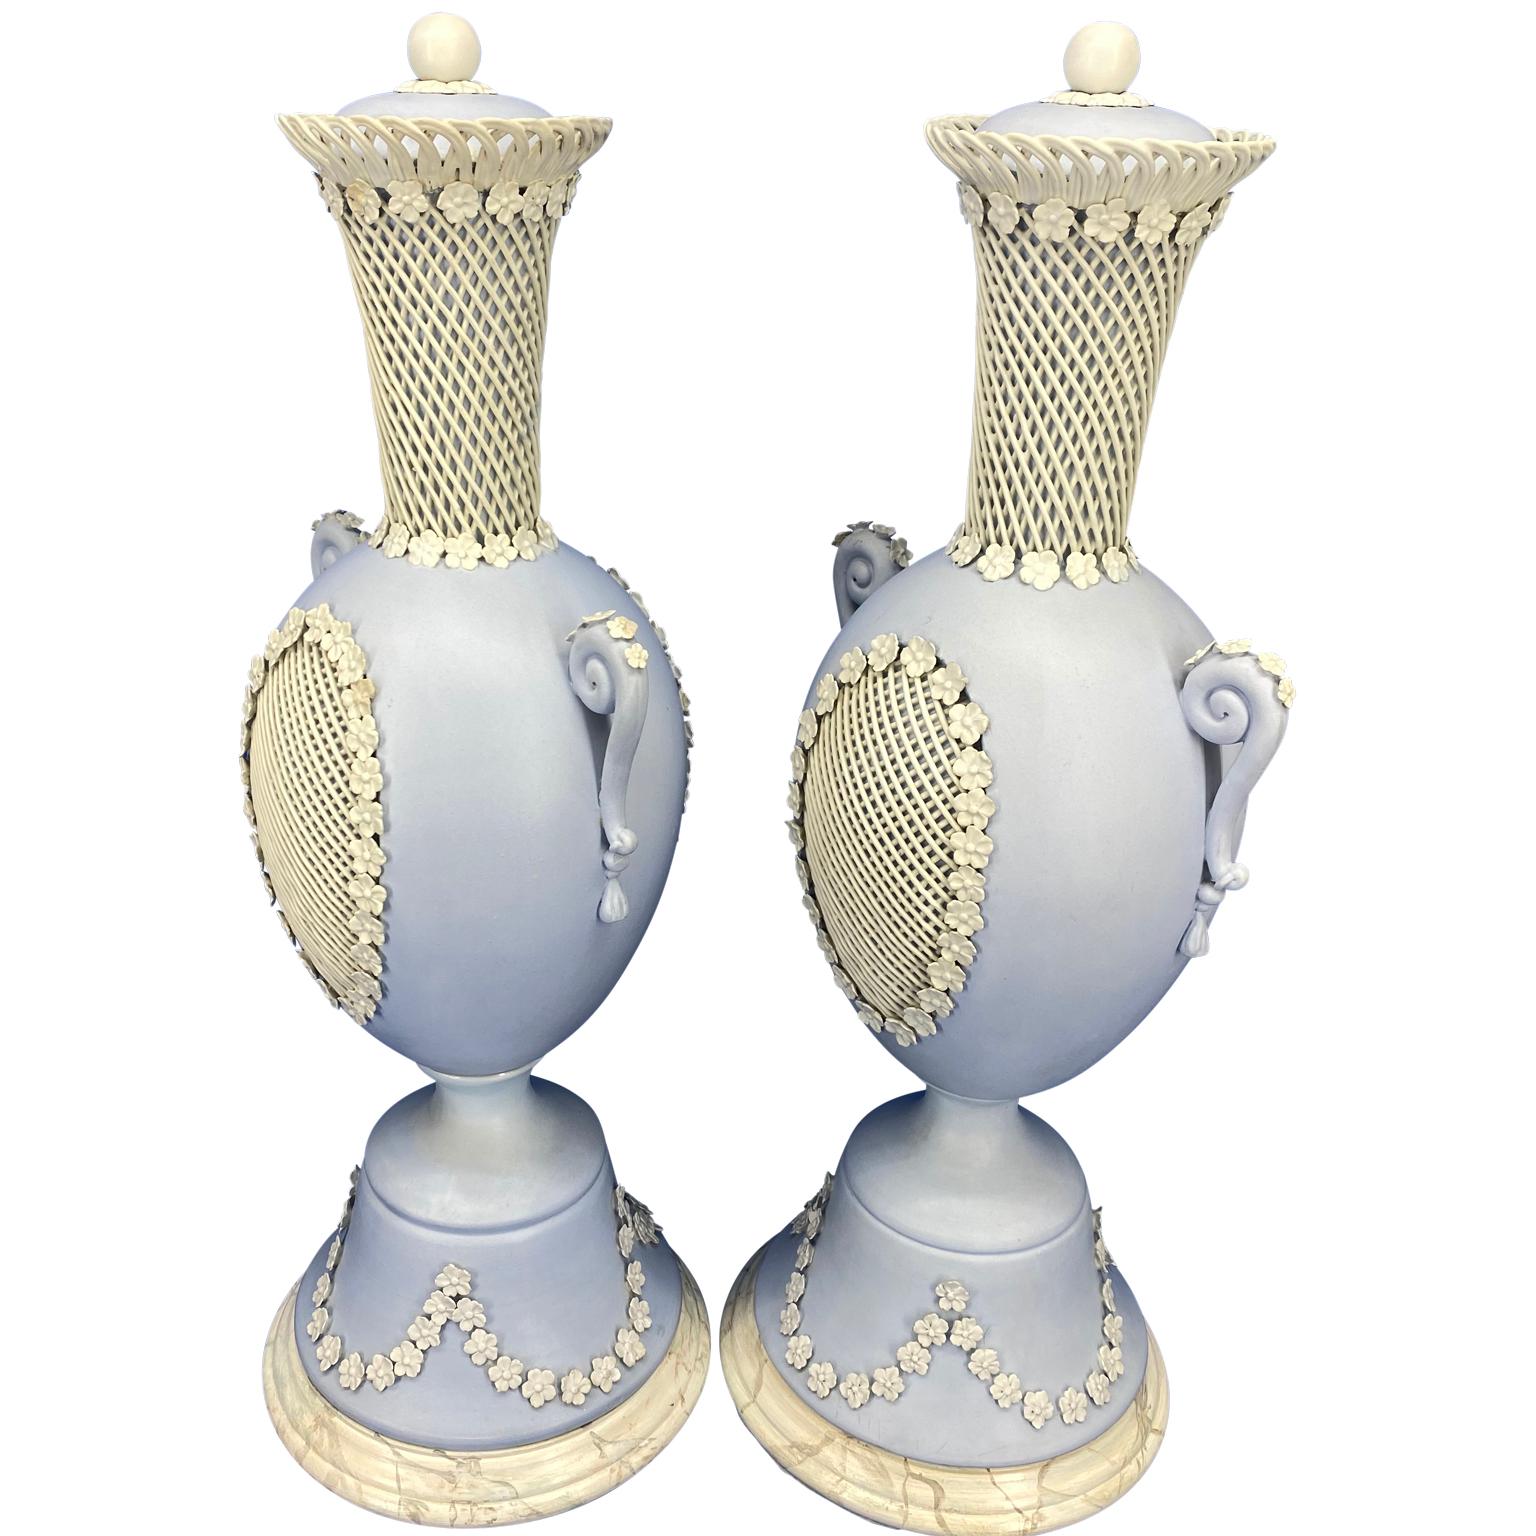 English Pair Of Light Blue Jasper Wedgwood Urns and Covers, England, Late 19th Century